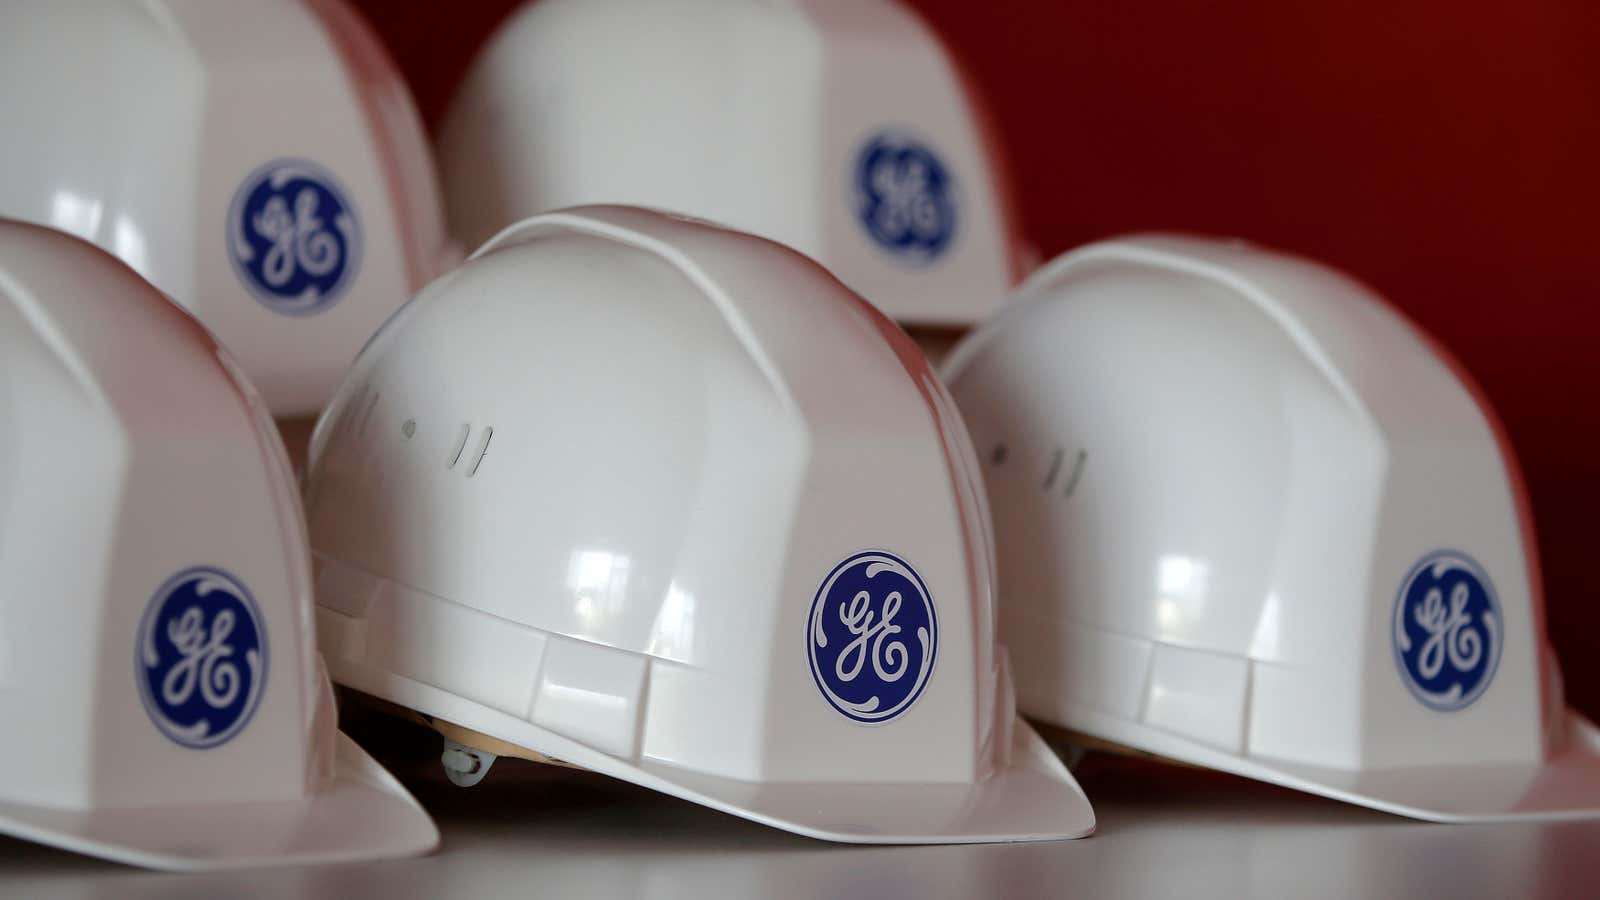 GE began rolling out “teaming” to all of its aviation plants in 2010.